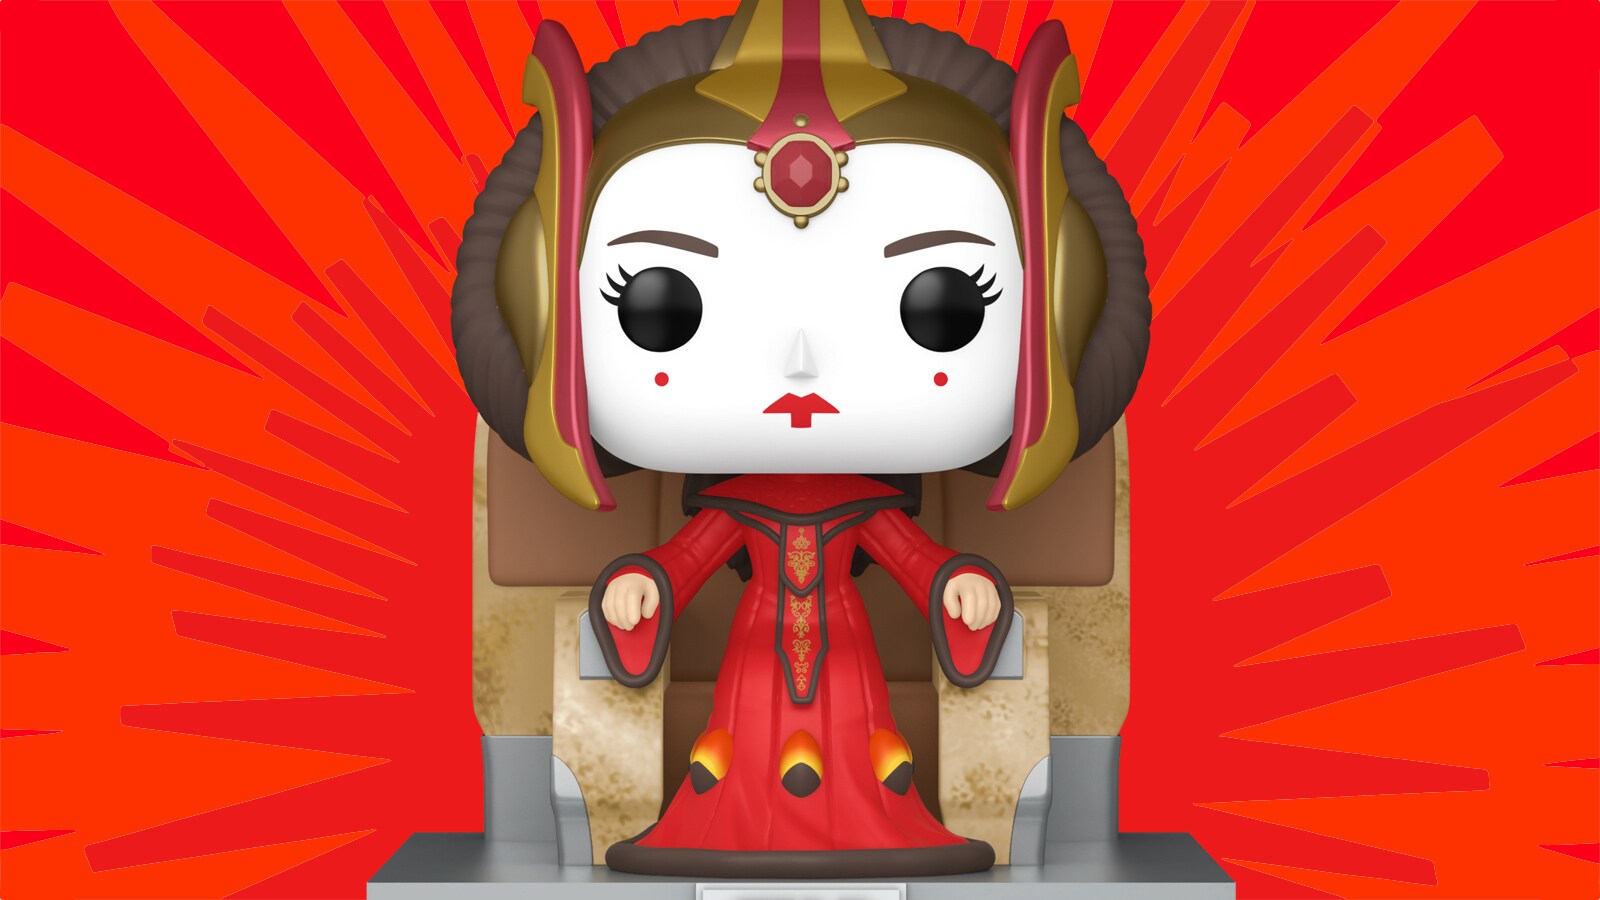 Star Wars: The Phantom Menace Gets the Funko Pop! Treatment - Exclusive Reveal